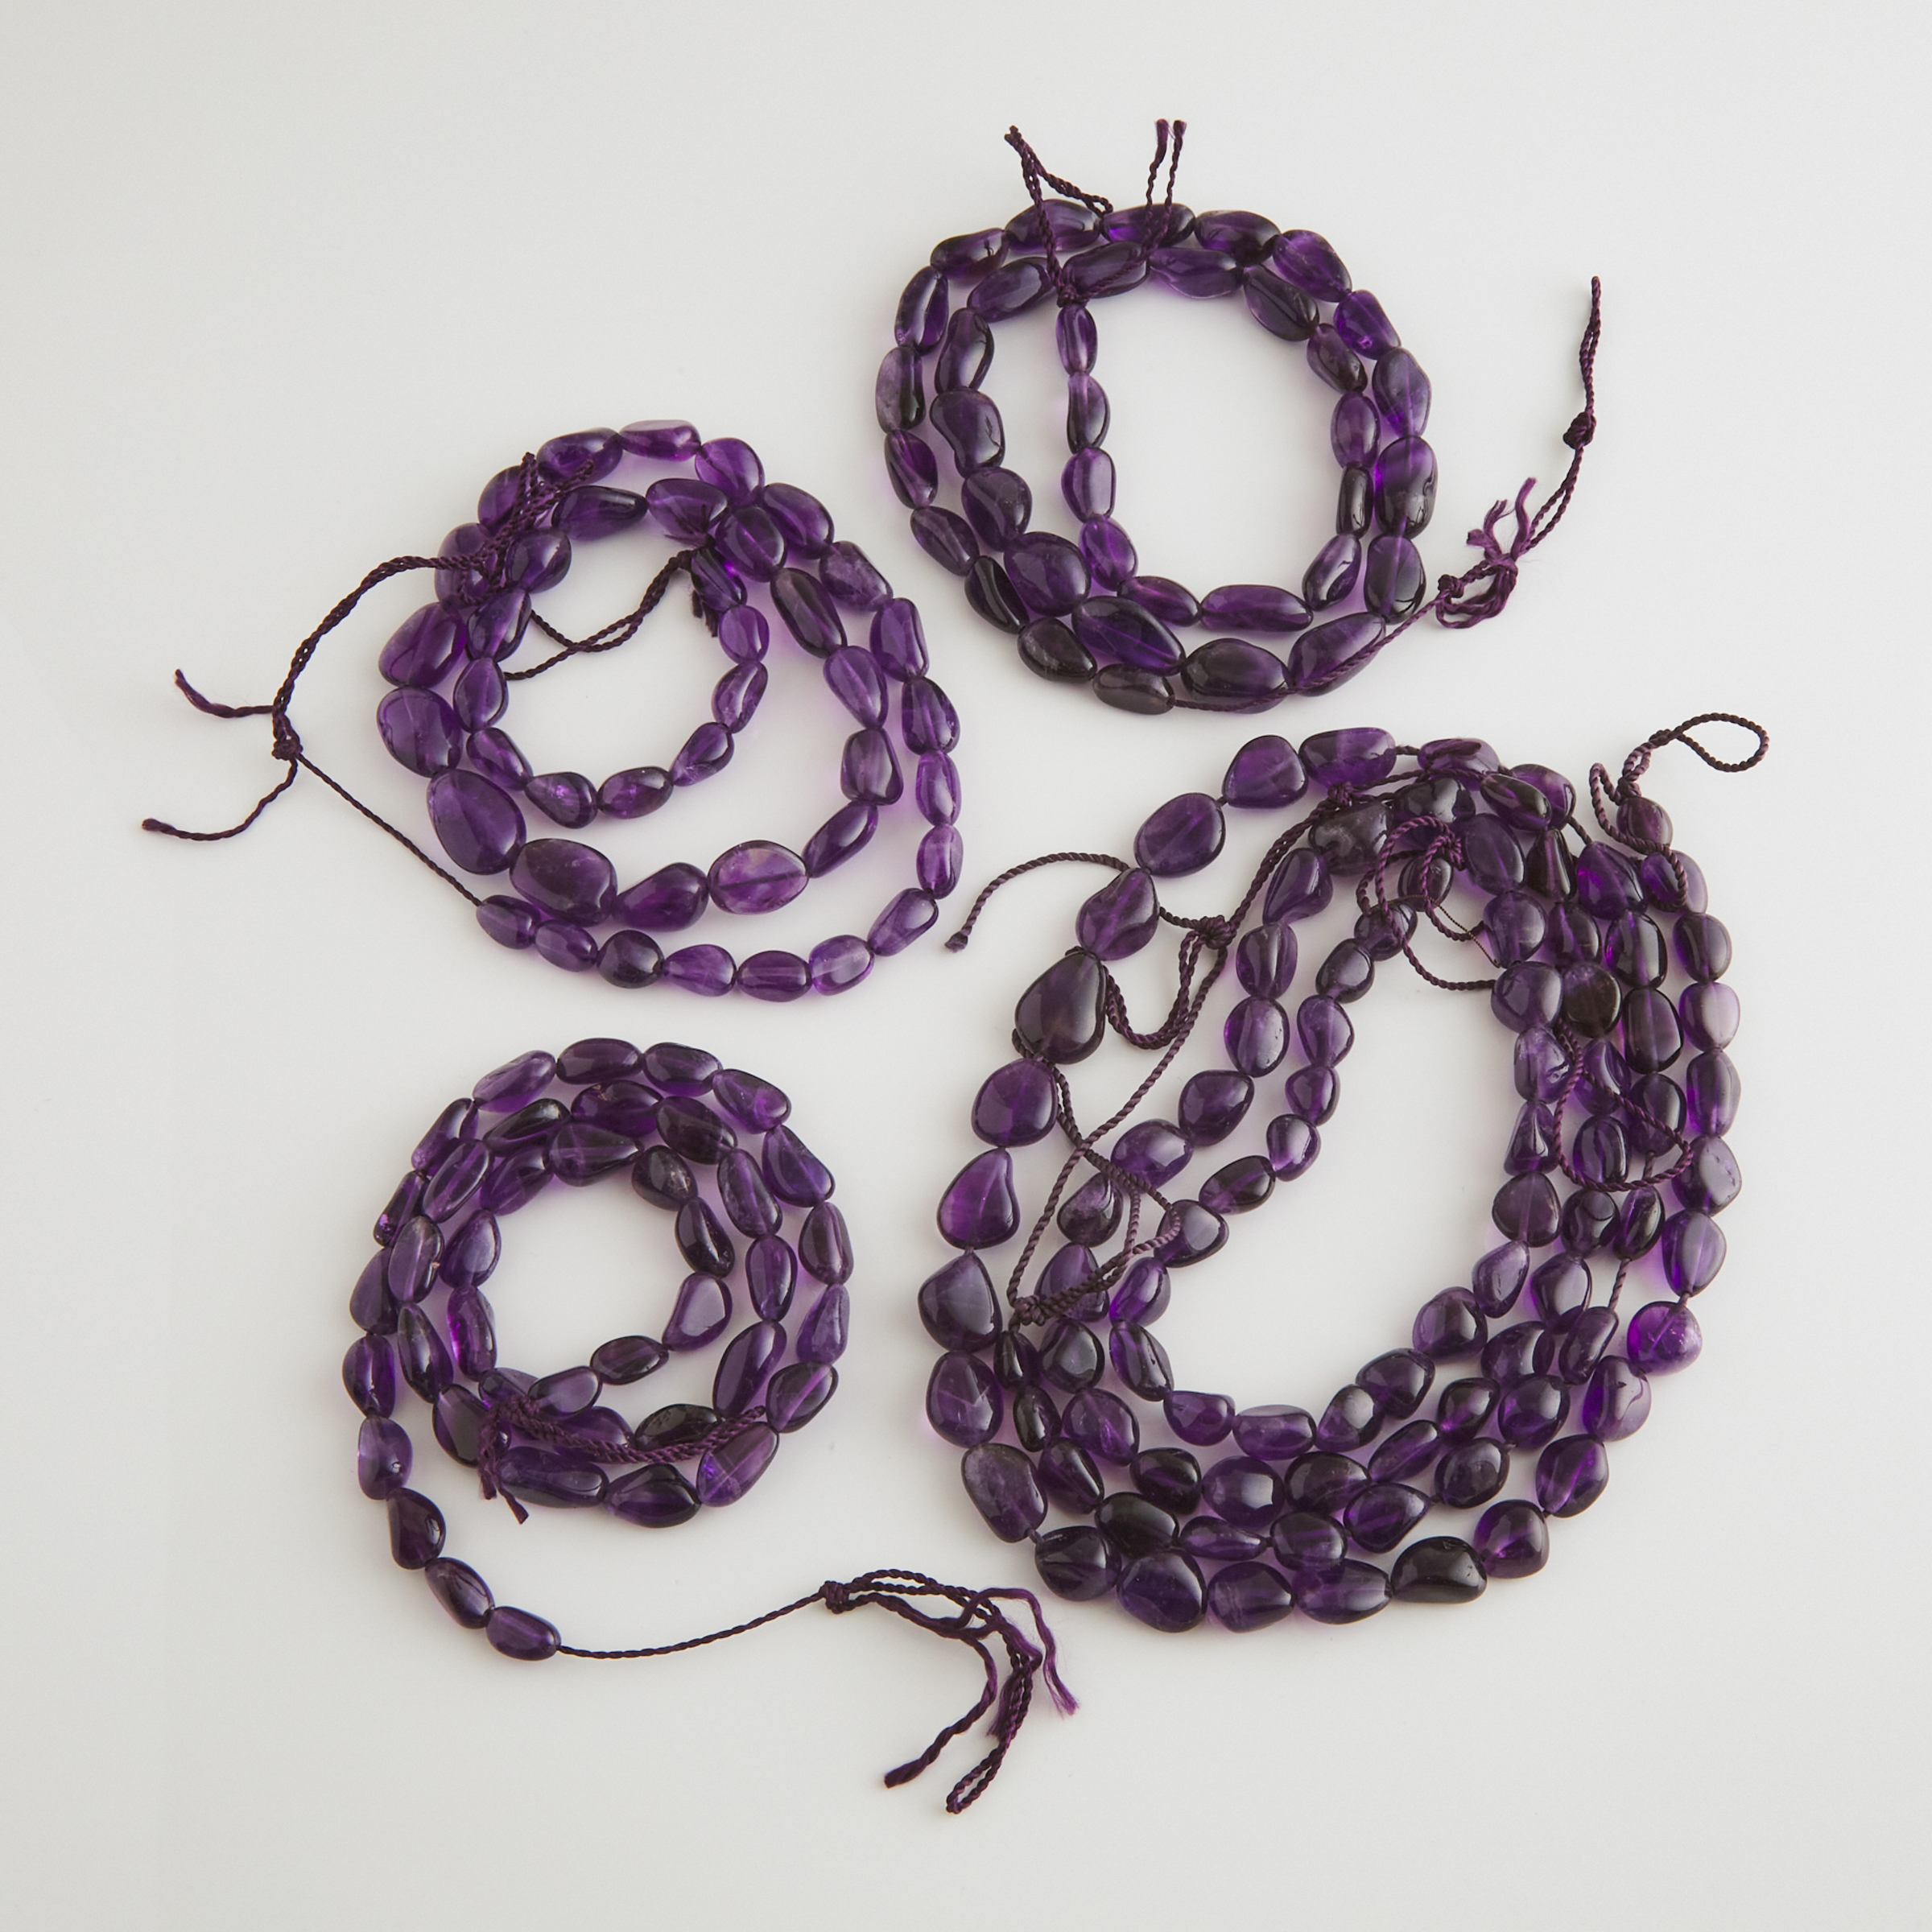 5 Strands Of Tumbled Amethyst Beads